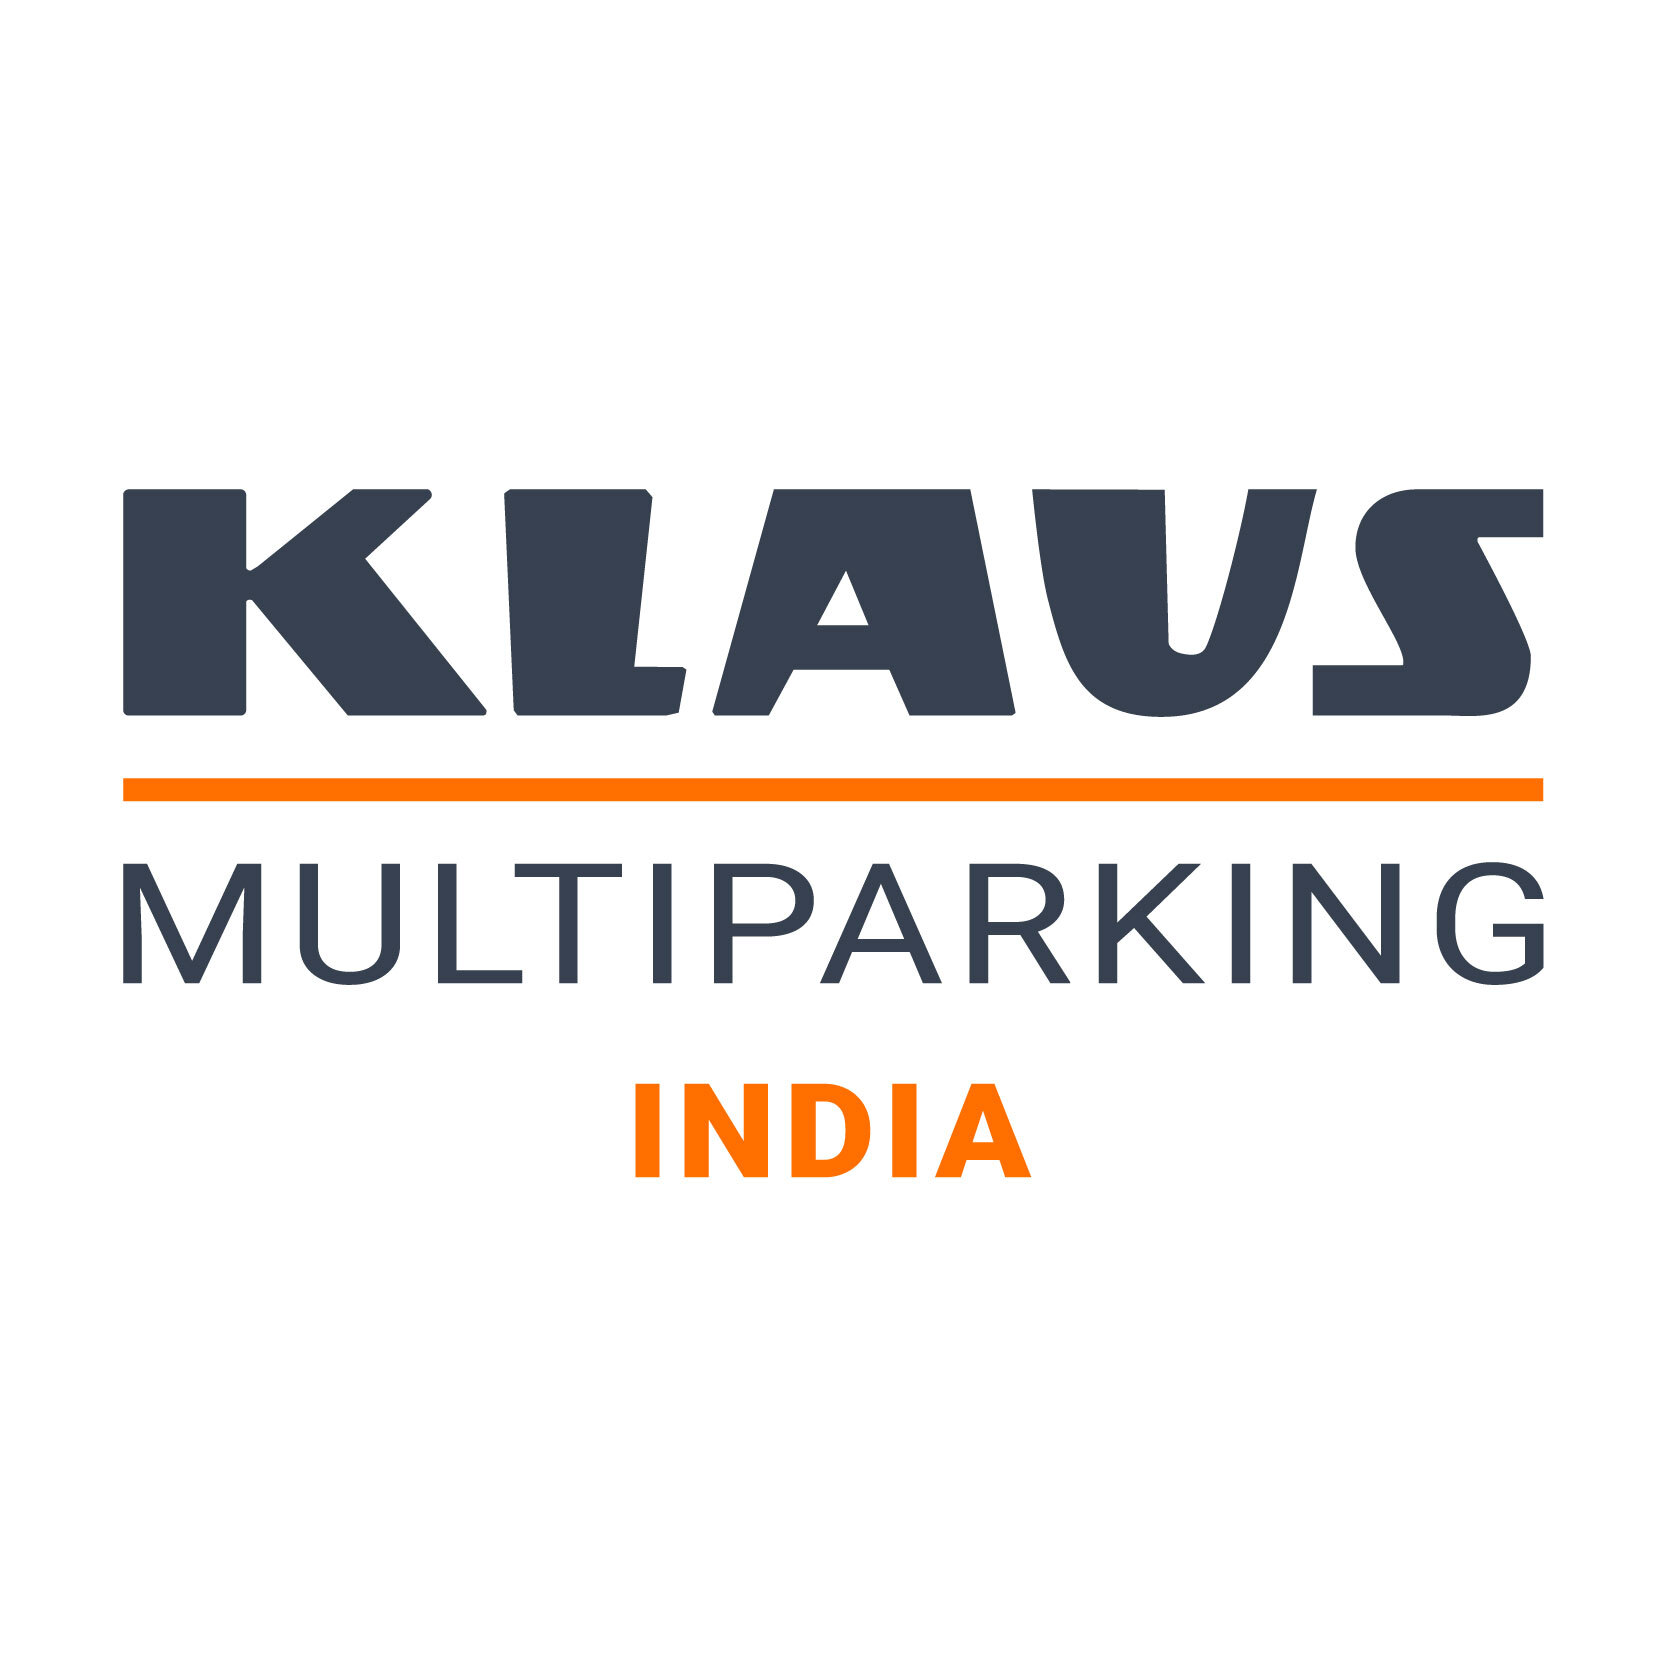 Best Car Parking Systems in India  KLAUS Multiparking - Maharashtra - Pune ID1553069